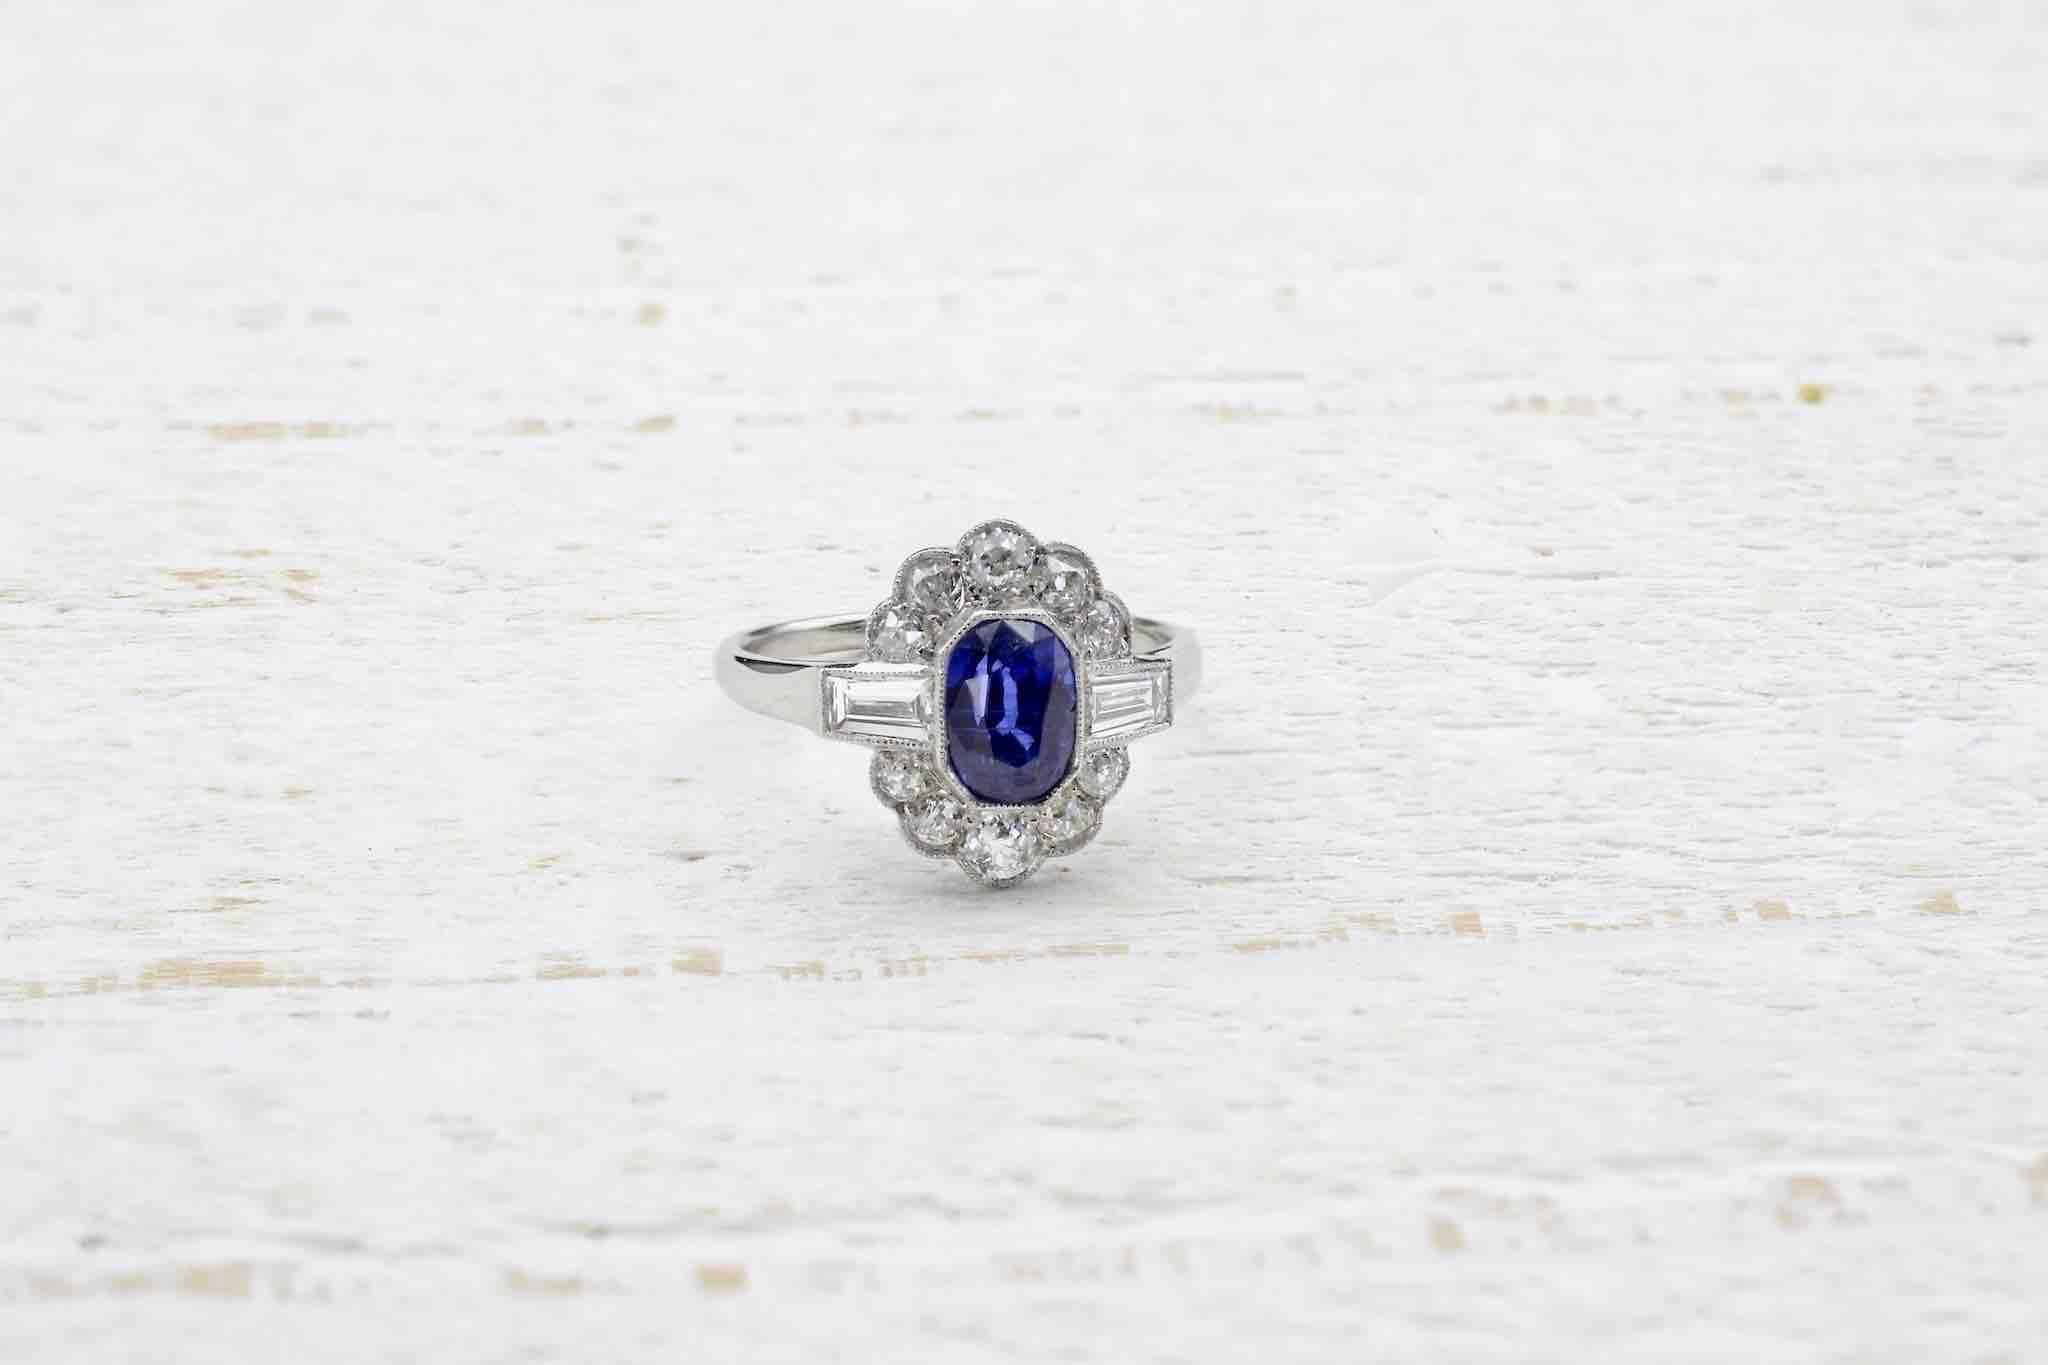 Stones: 1.48 carat sapphire and diamonds
brilliant and baguette cut for a total weight of 1 carat.
Material: Platinum
Dimensions: 14 mm length on finger
Weight: 3.5g
Size: 52 (free sizing)
Certificate
Ref. : 22801